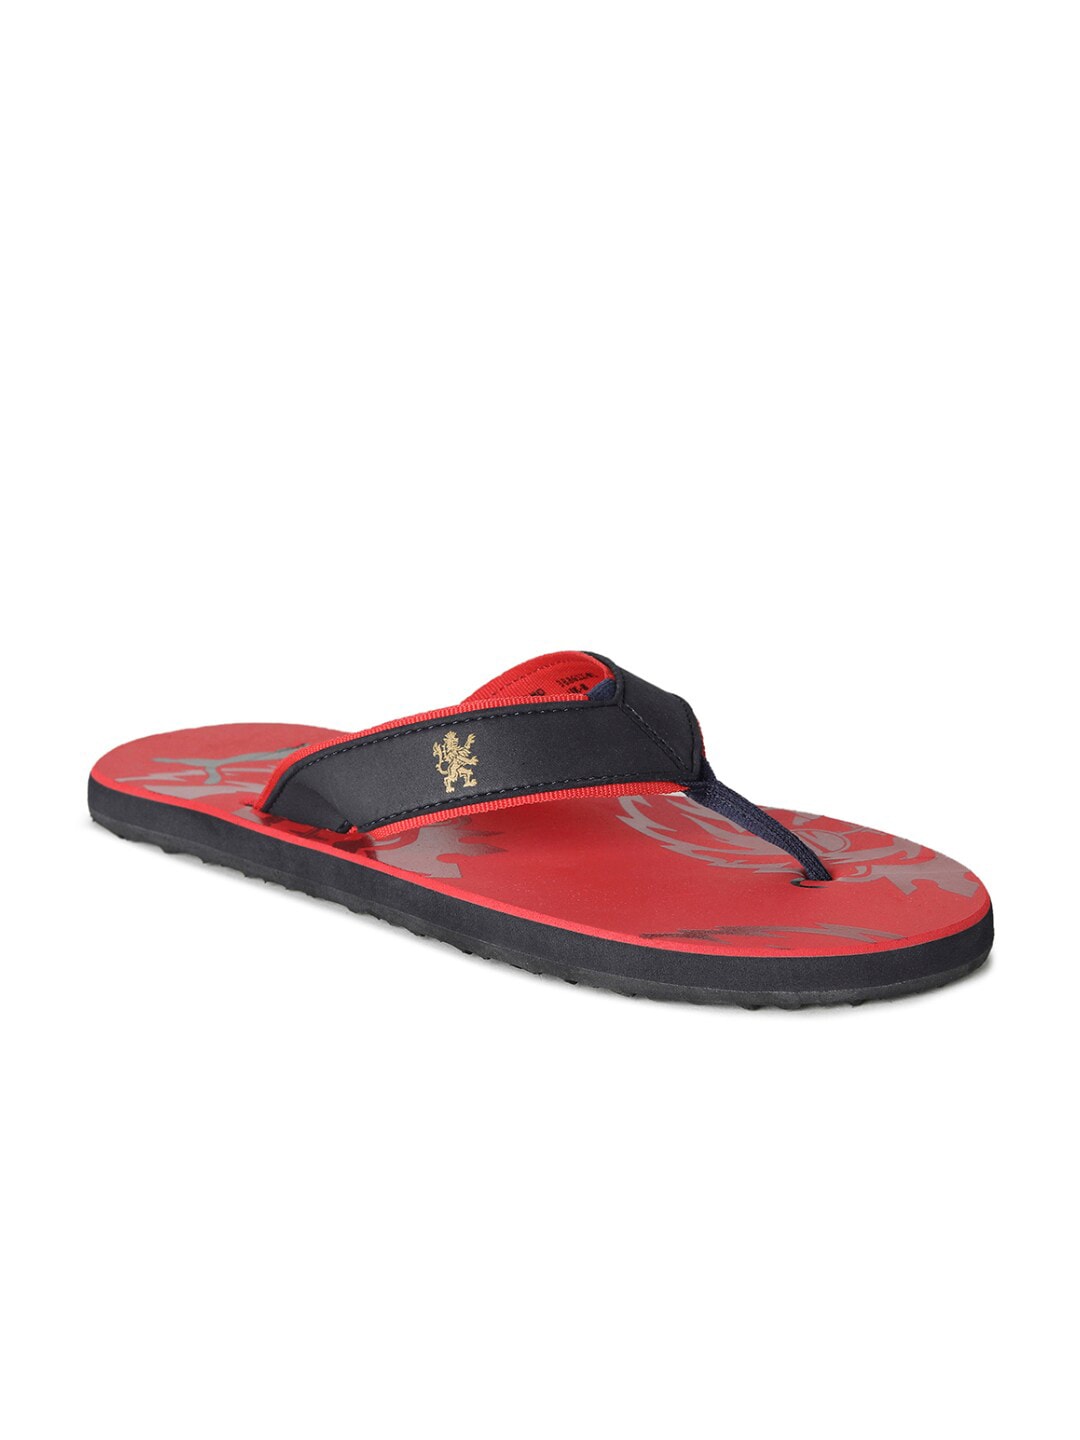 Puma Unsex Red Royal Challengers Bangalore Printed Flip Flops